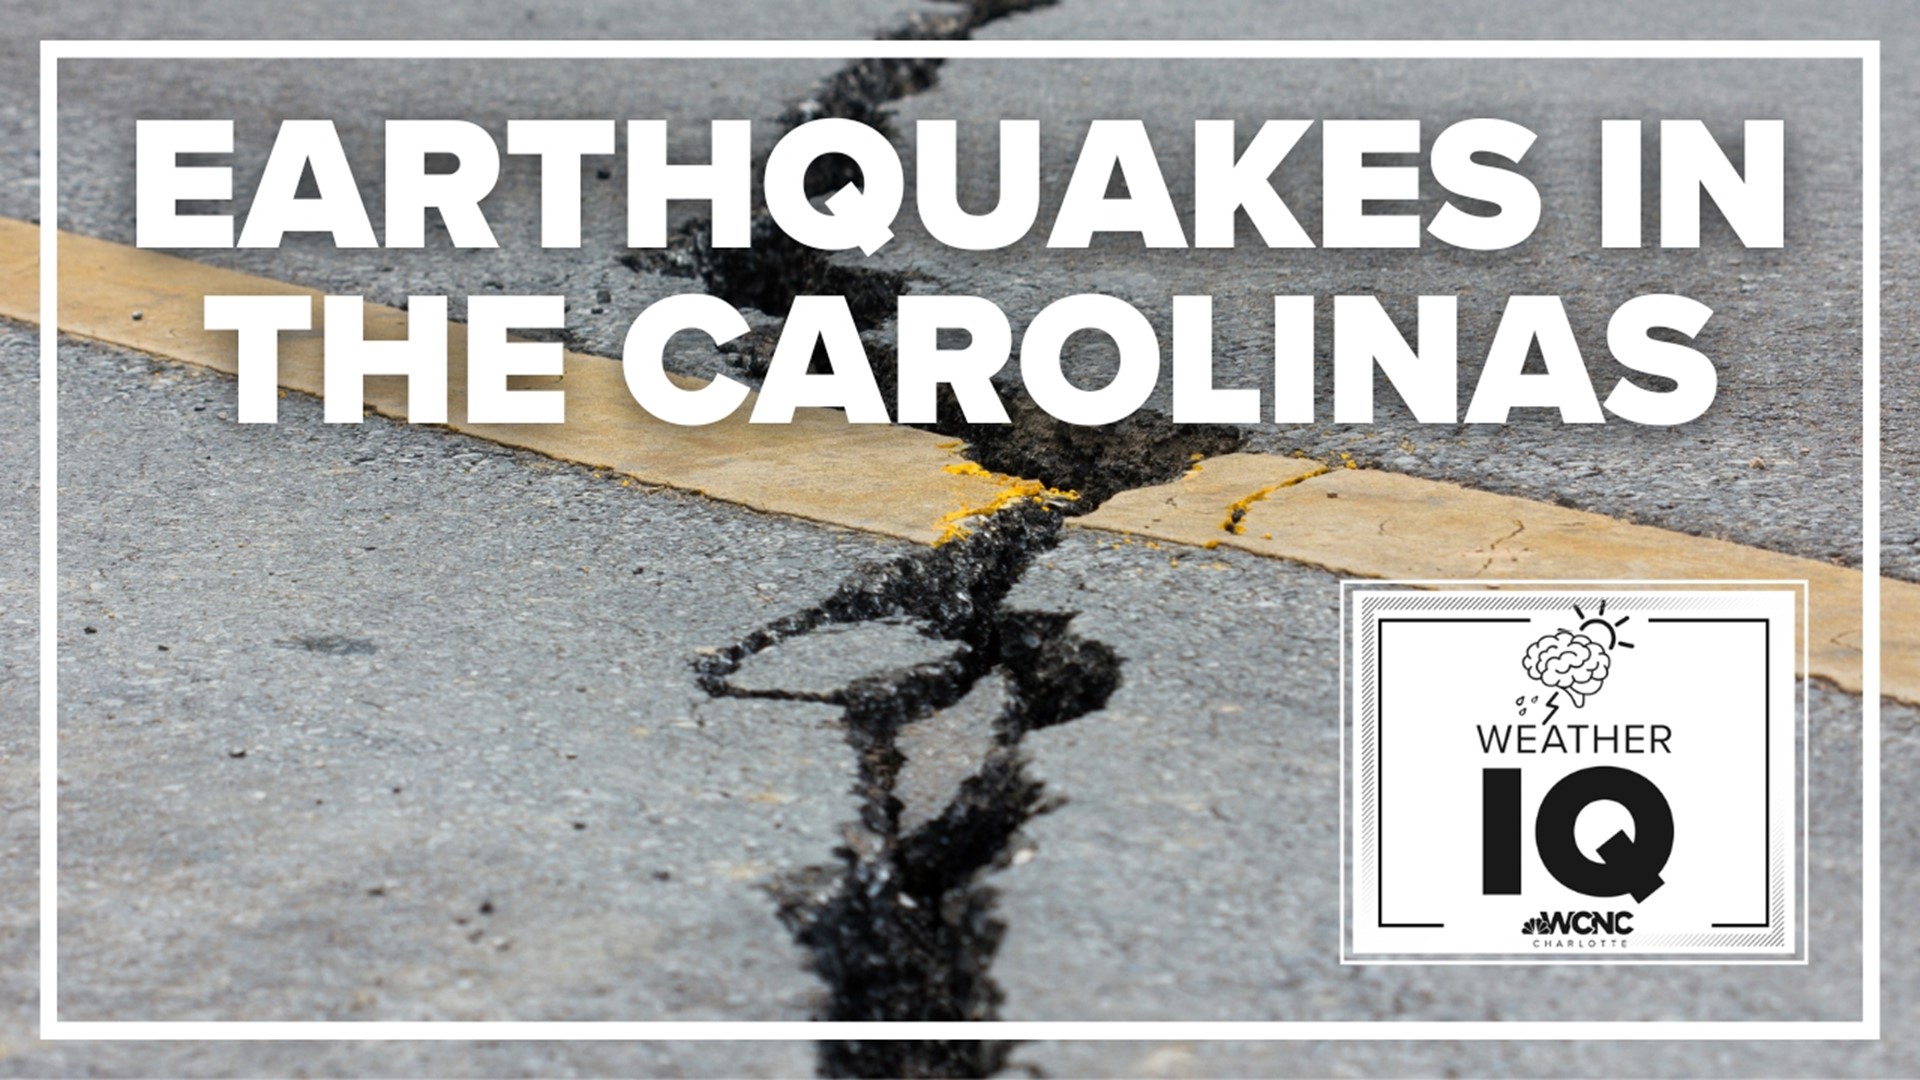 Earthquakes in South Carolina are more common than you might think